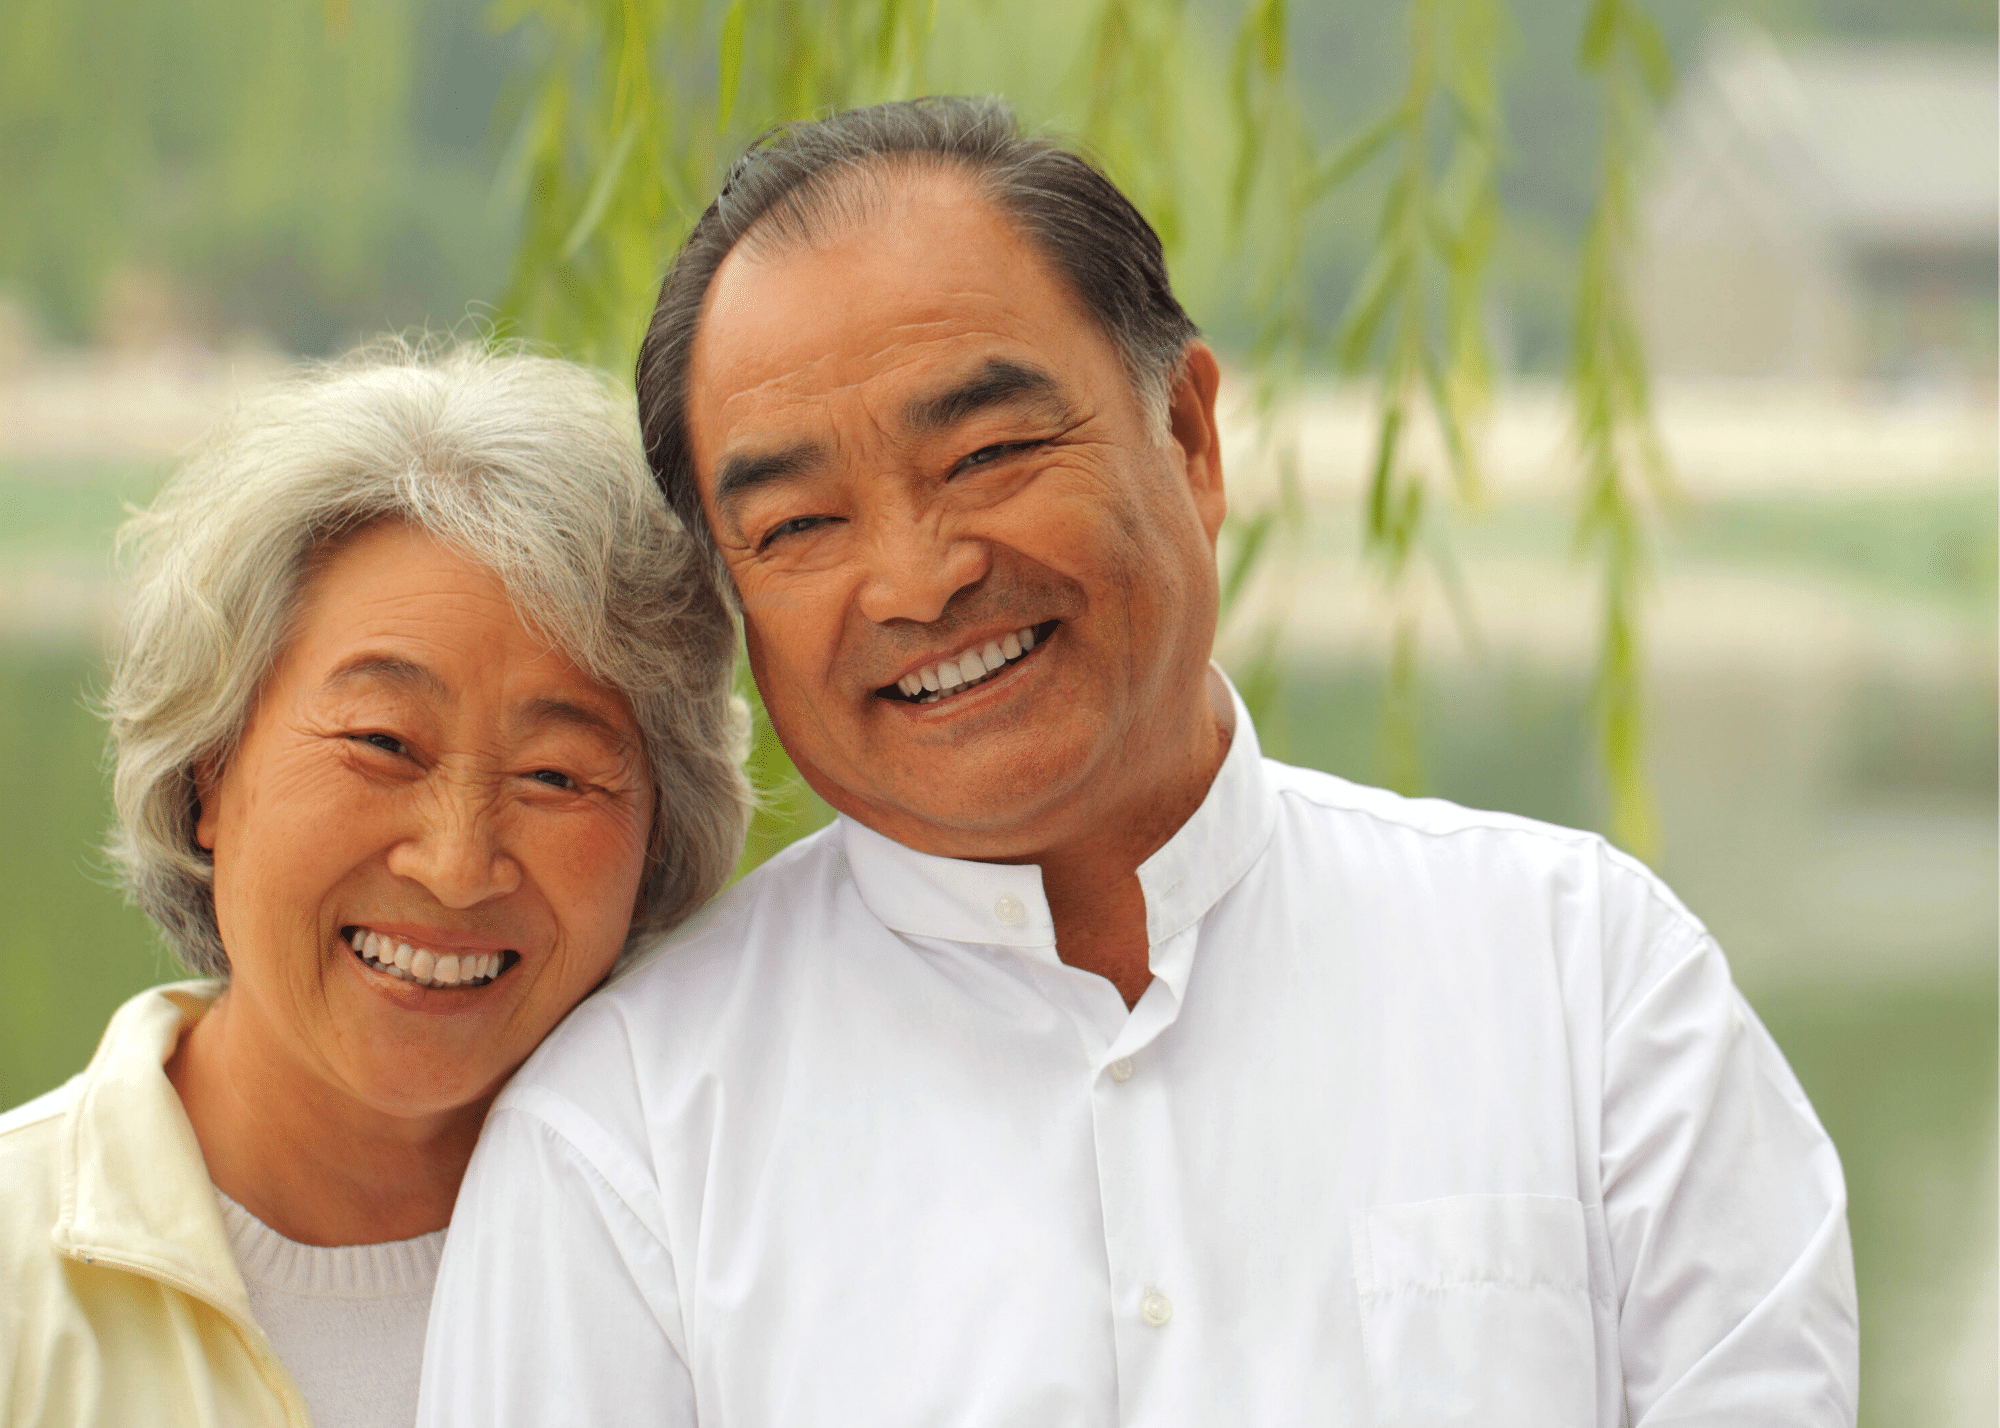 Portrait of an older Asian couple smiling and looking at the camera while outside